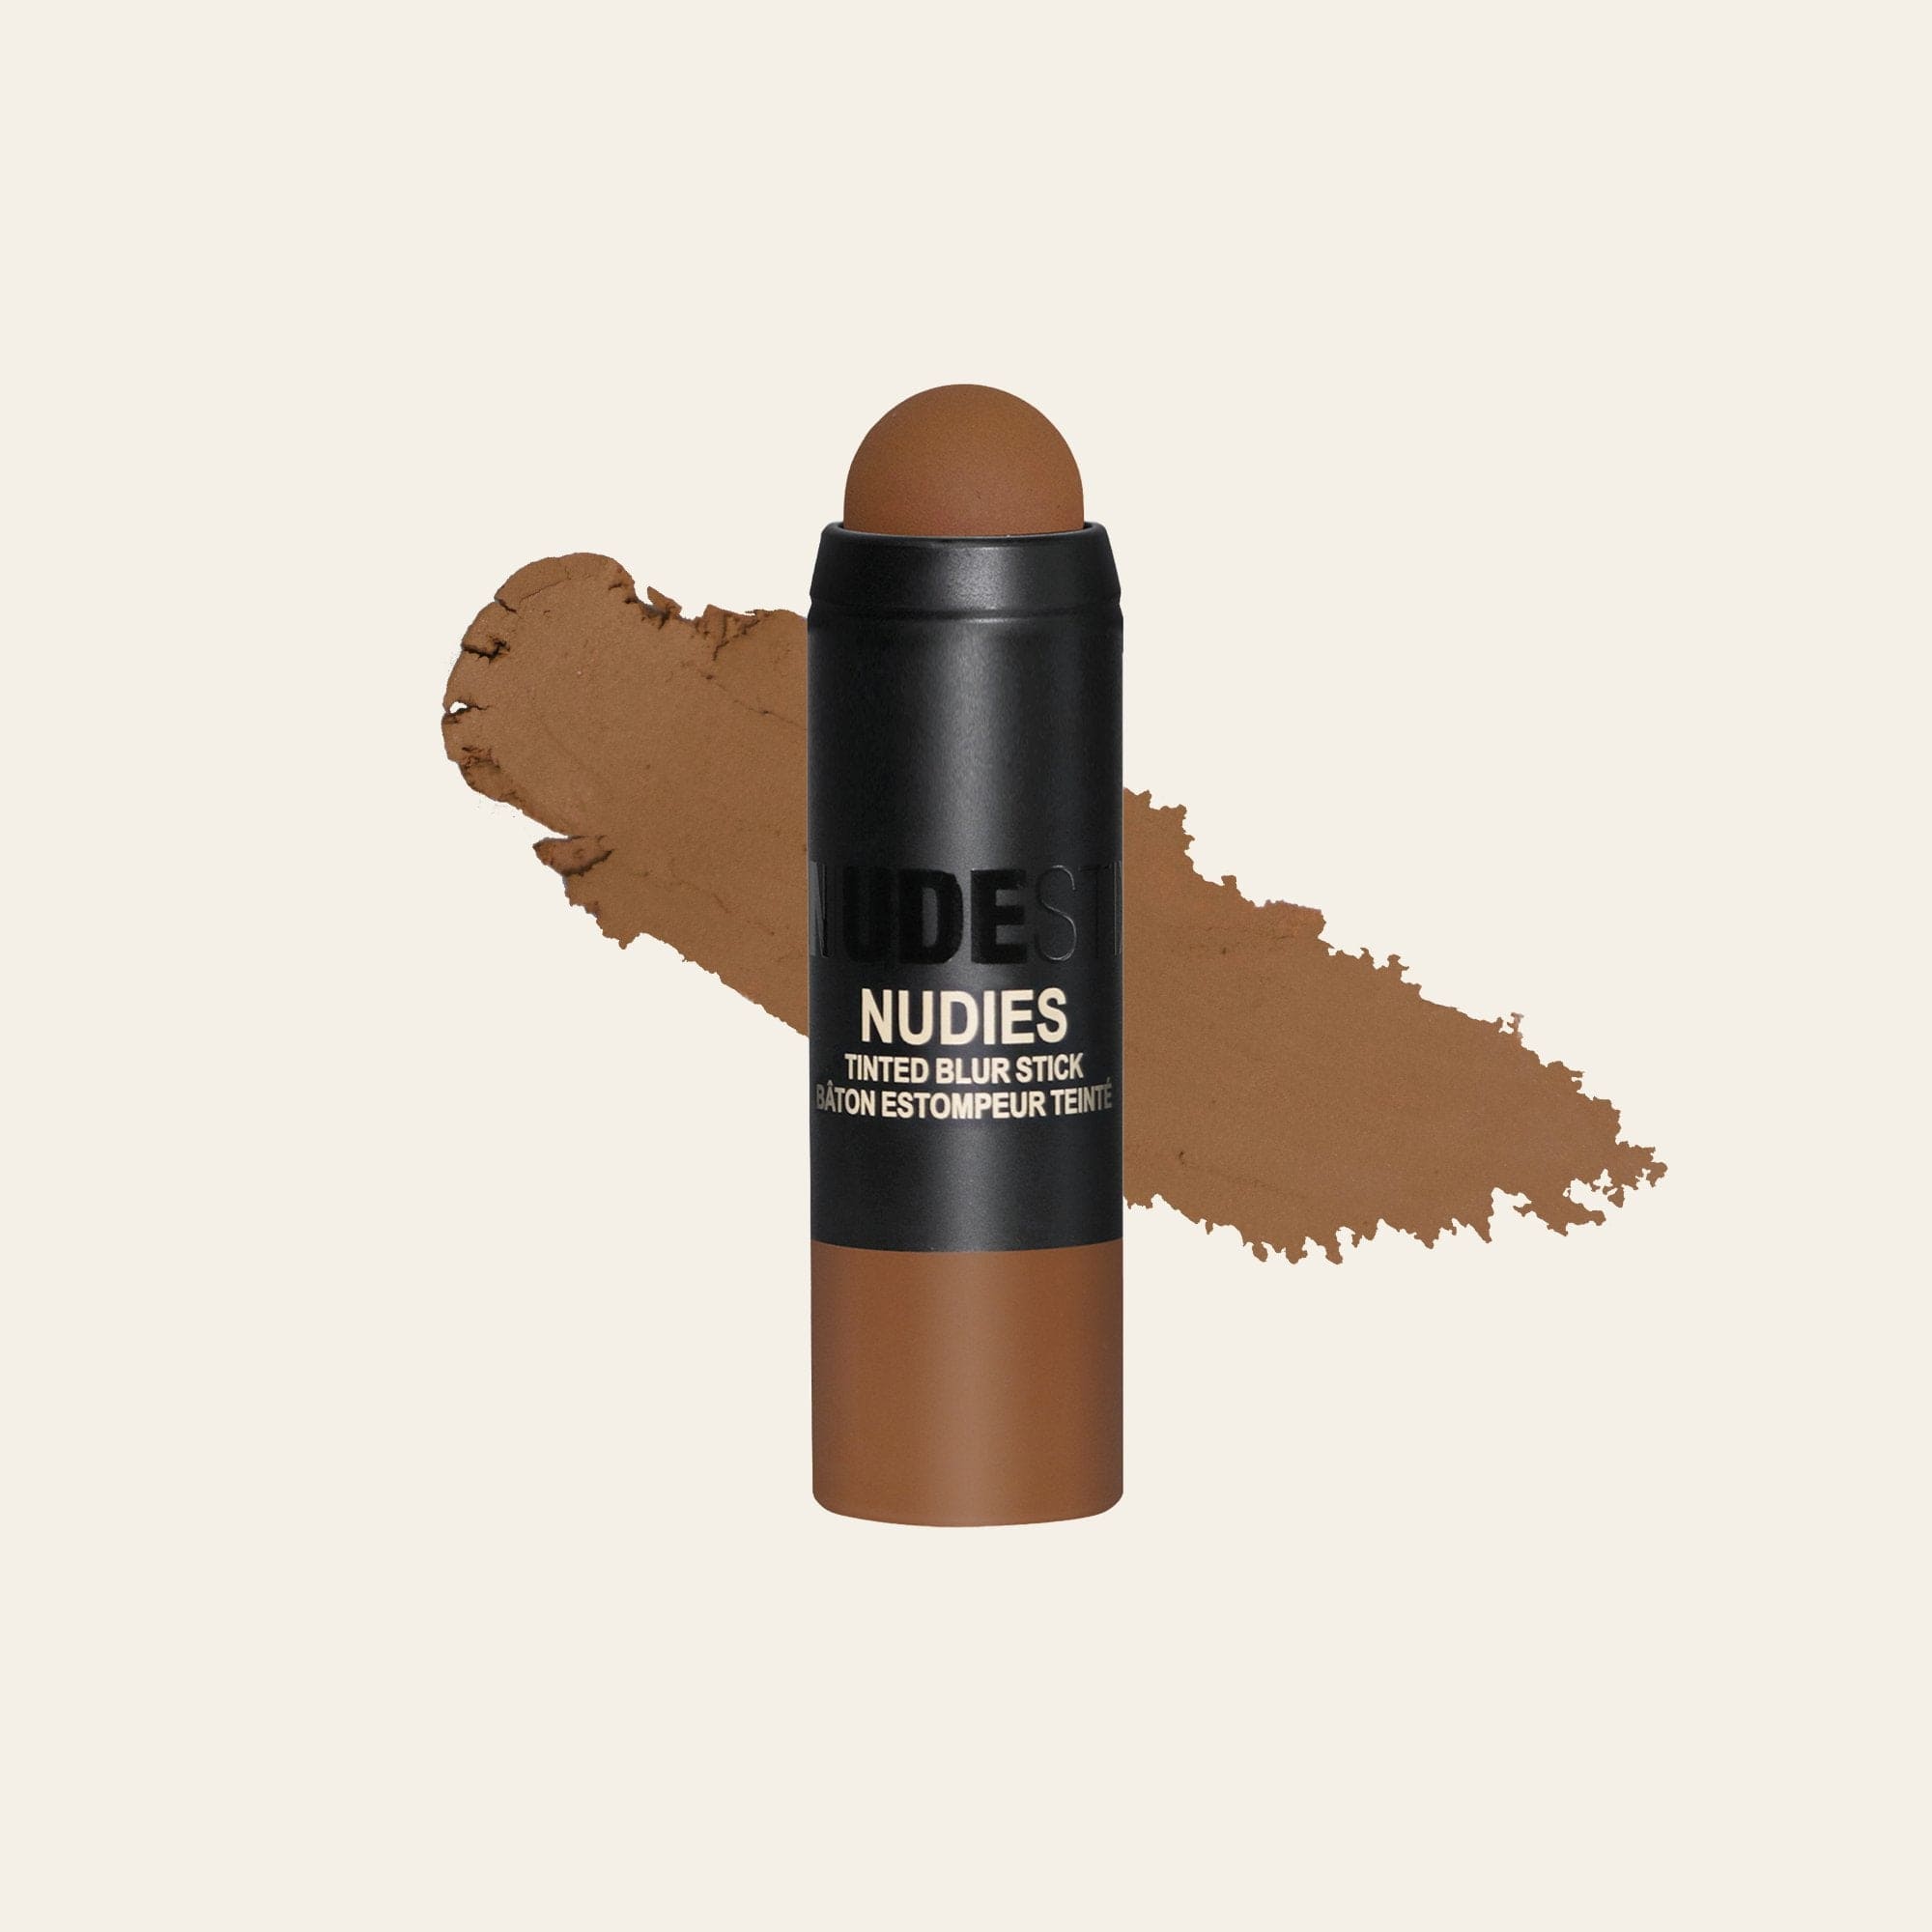 Tinted Blur Foundation Stick in shade Deep 9